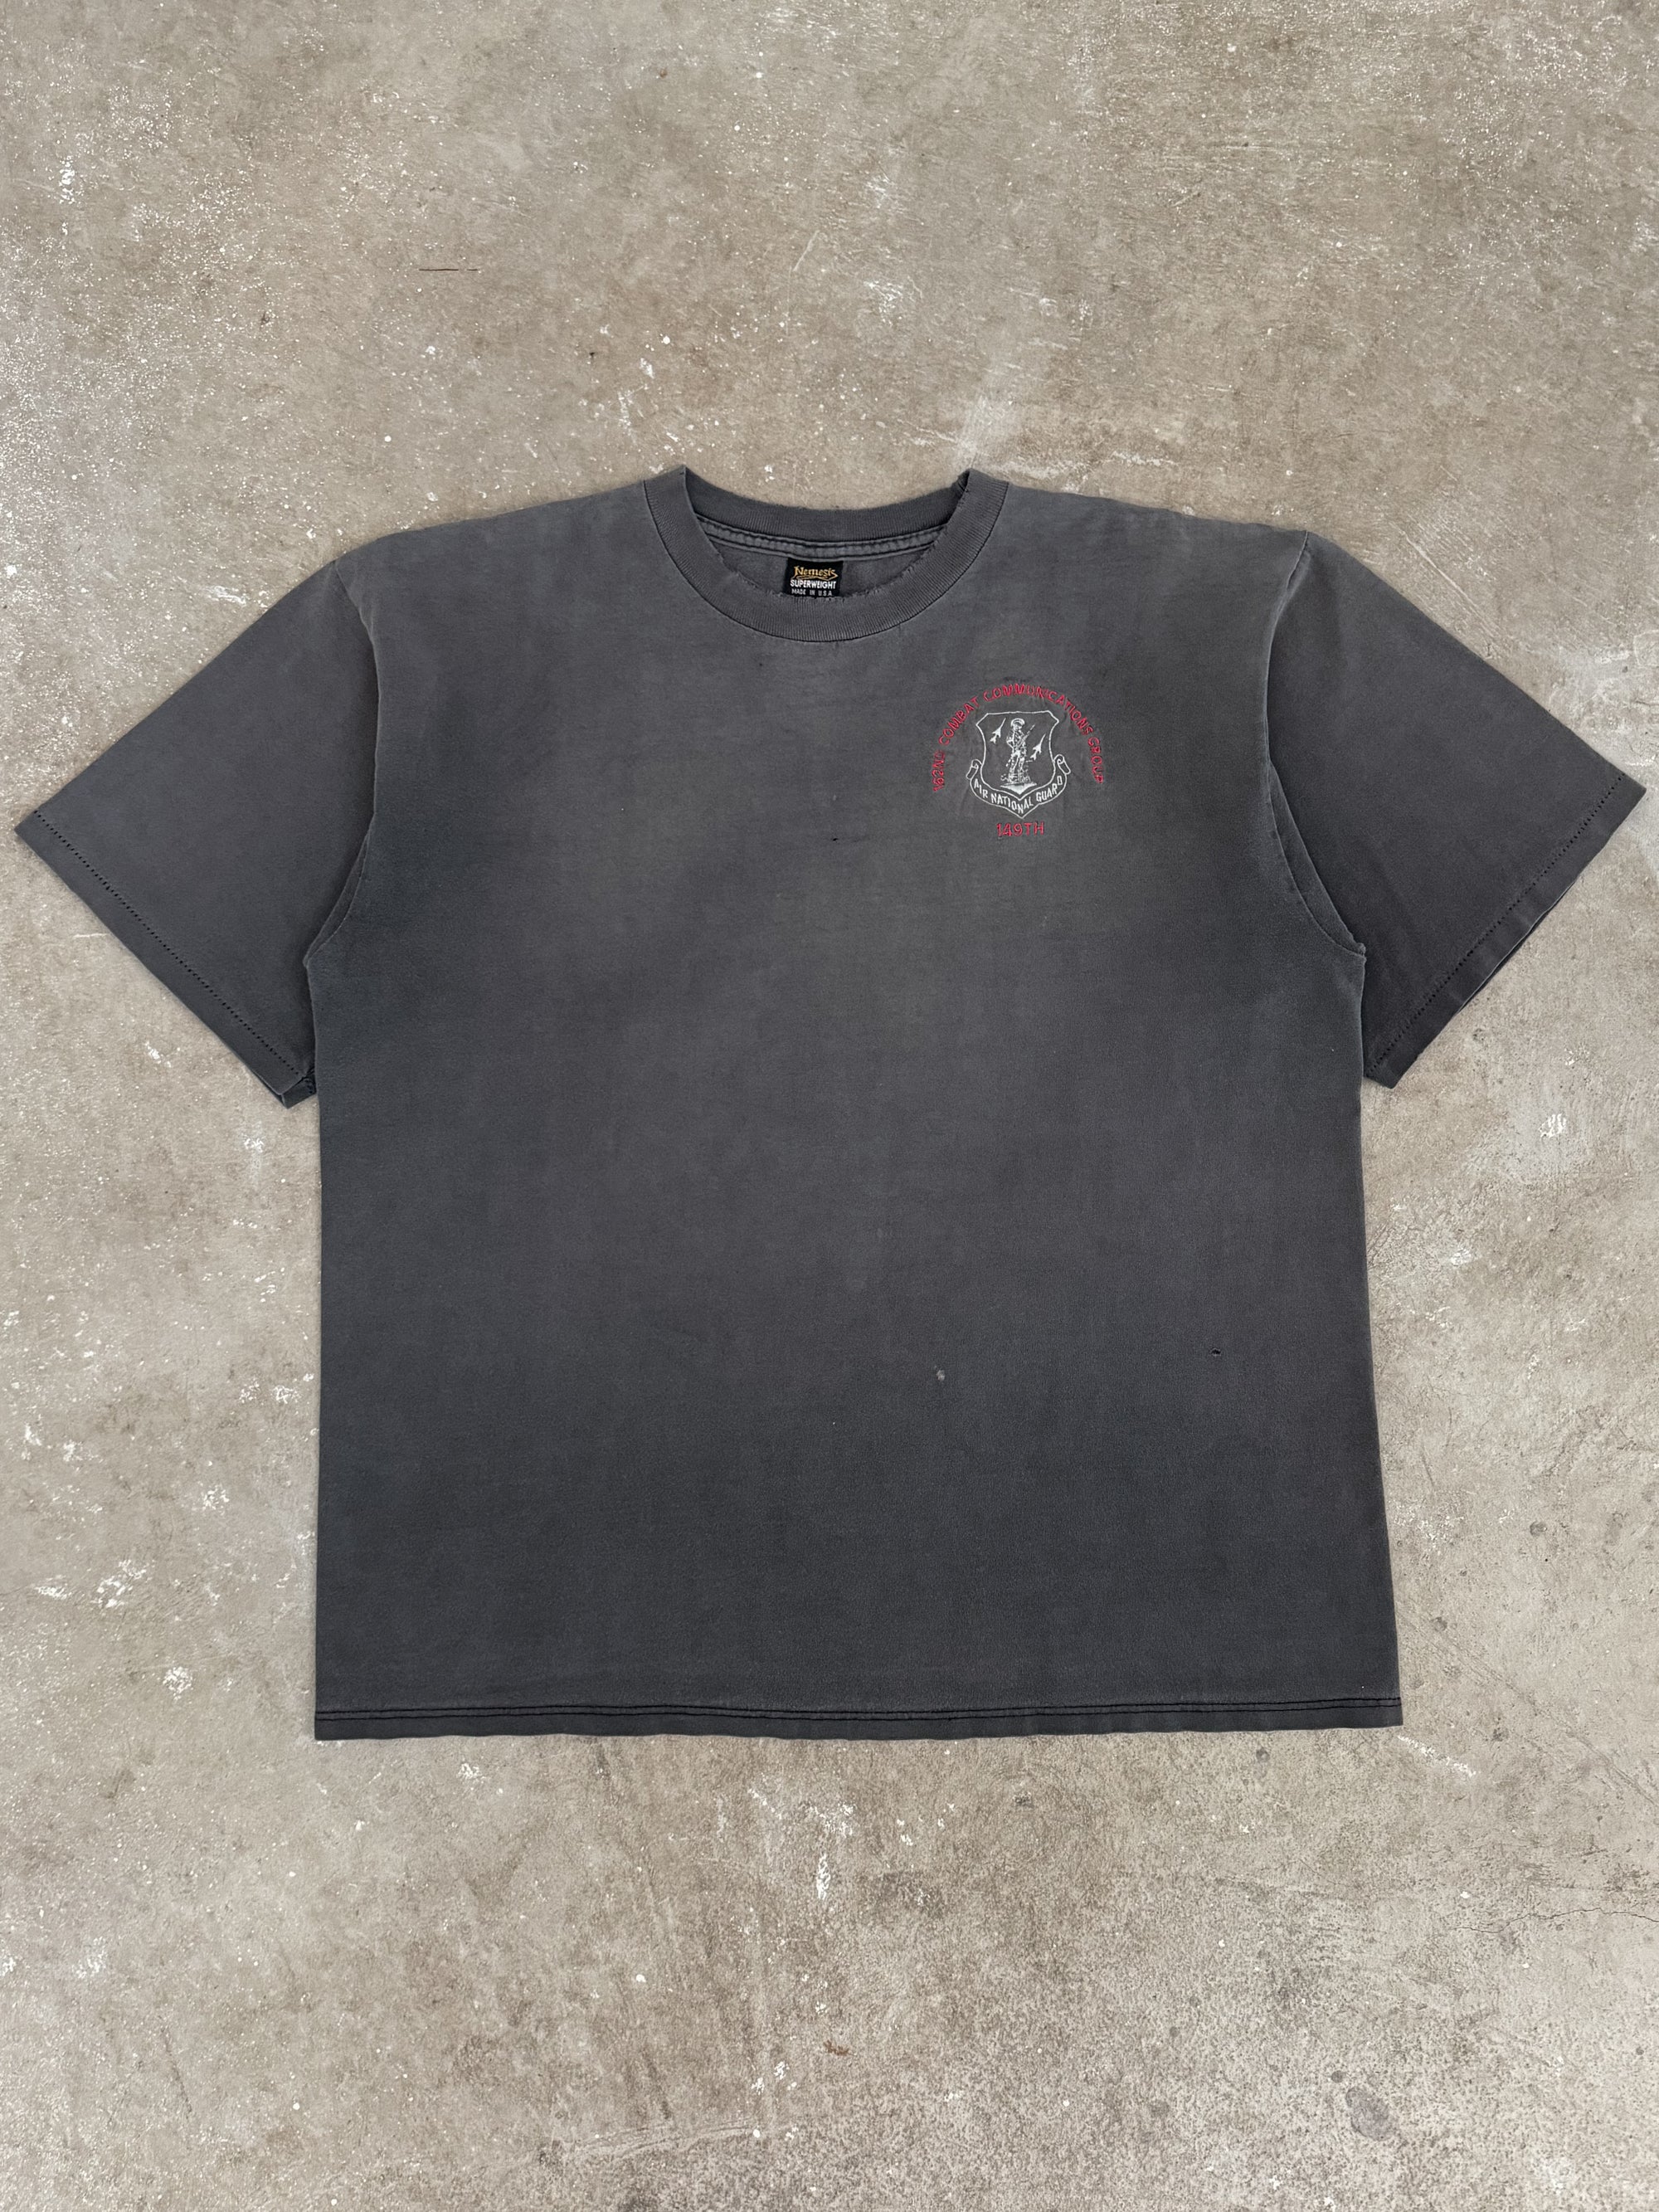 1990s "Combat Communications Group" Distressed Faded Tee (XL)